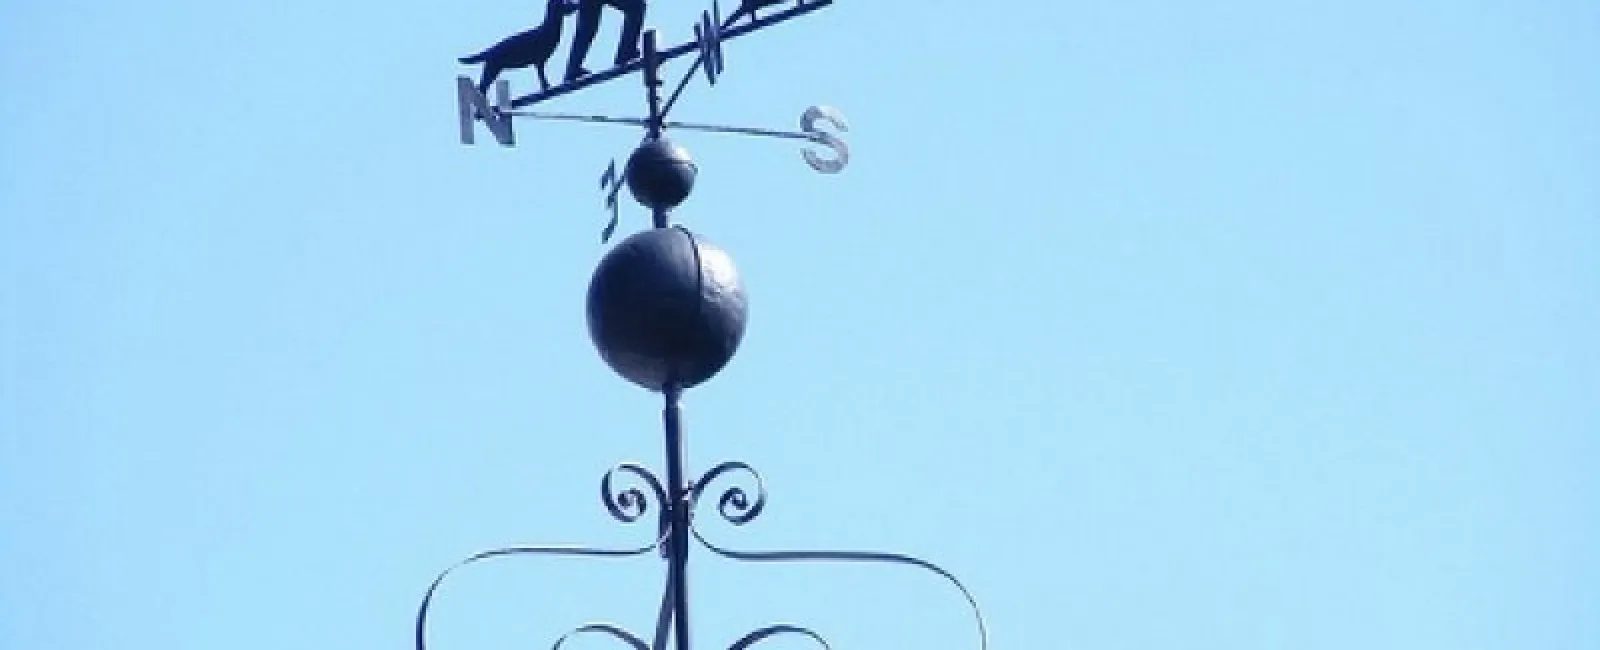 The Weather Vane: Installing and using this efficient roof tool